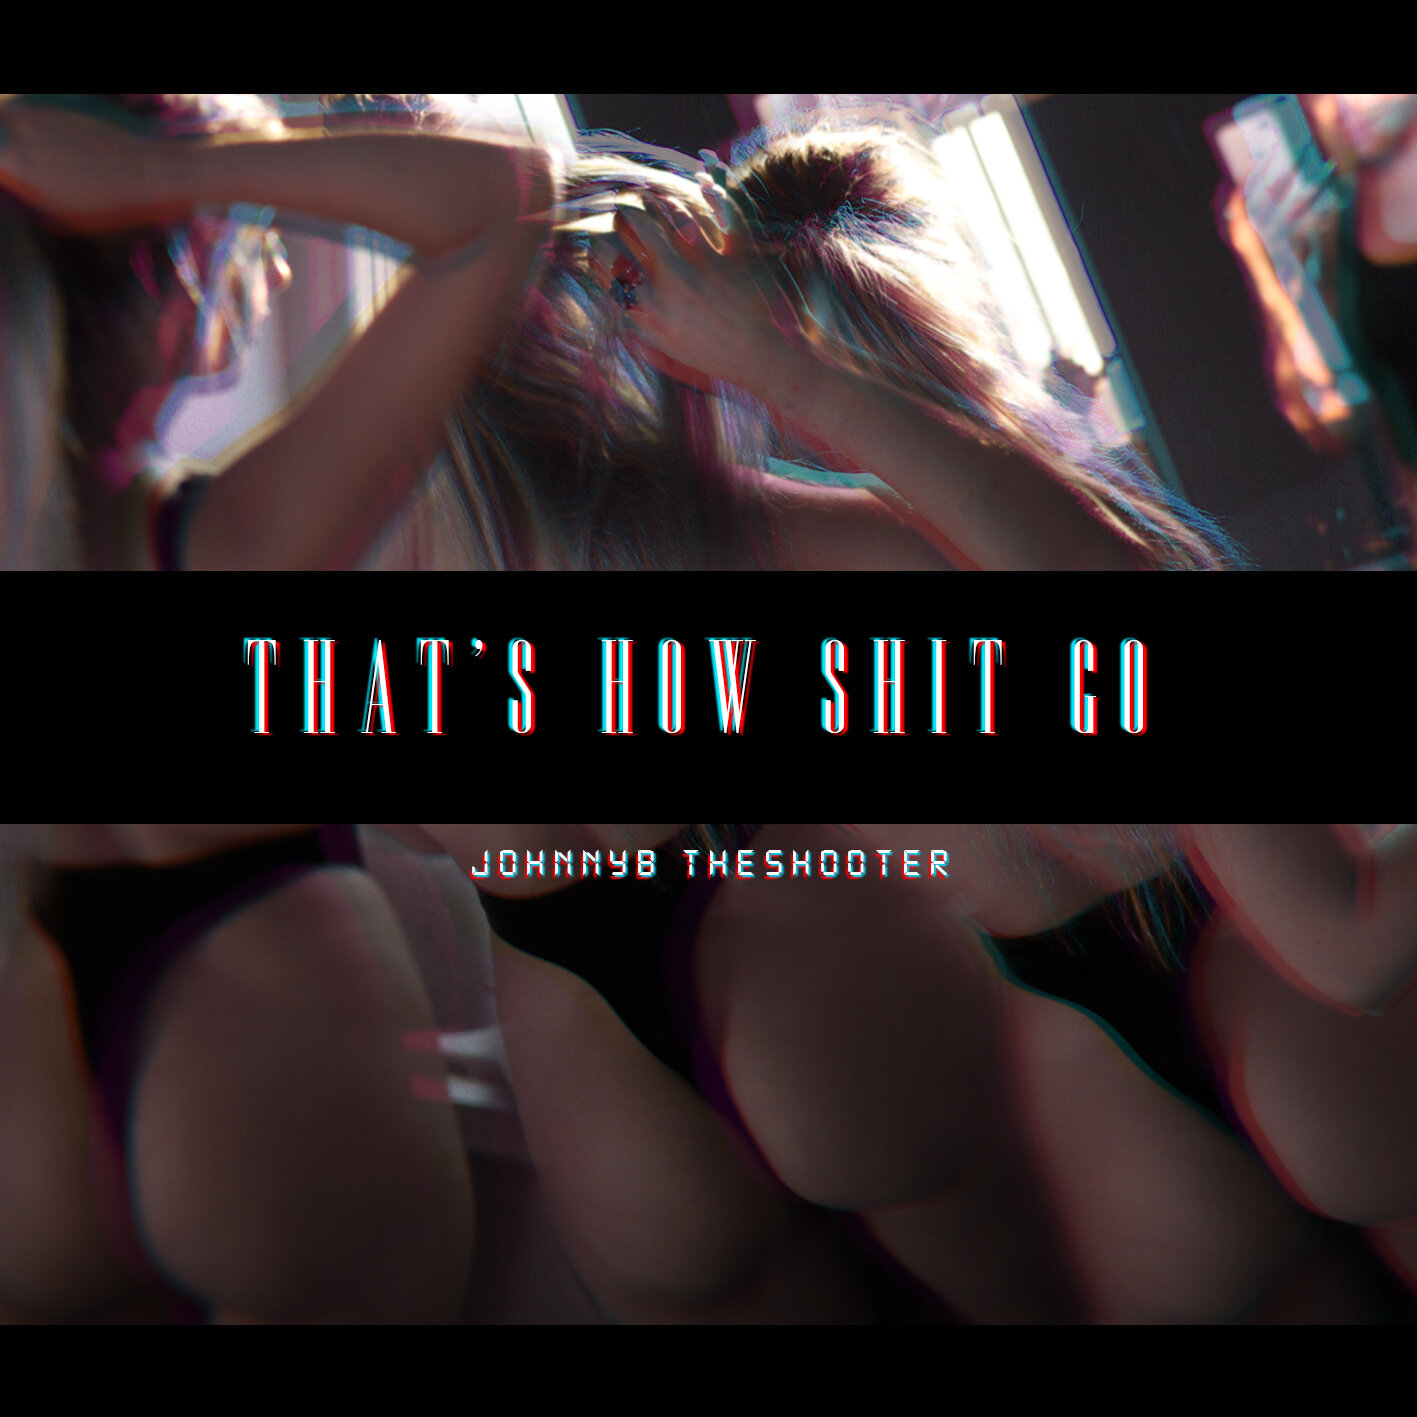 That's How Shit Go - JohnnyB theShooter COVER.jpg